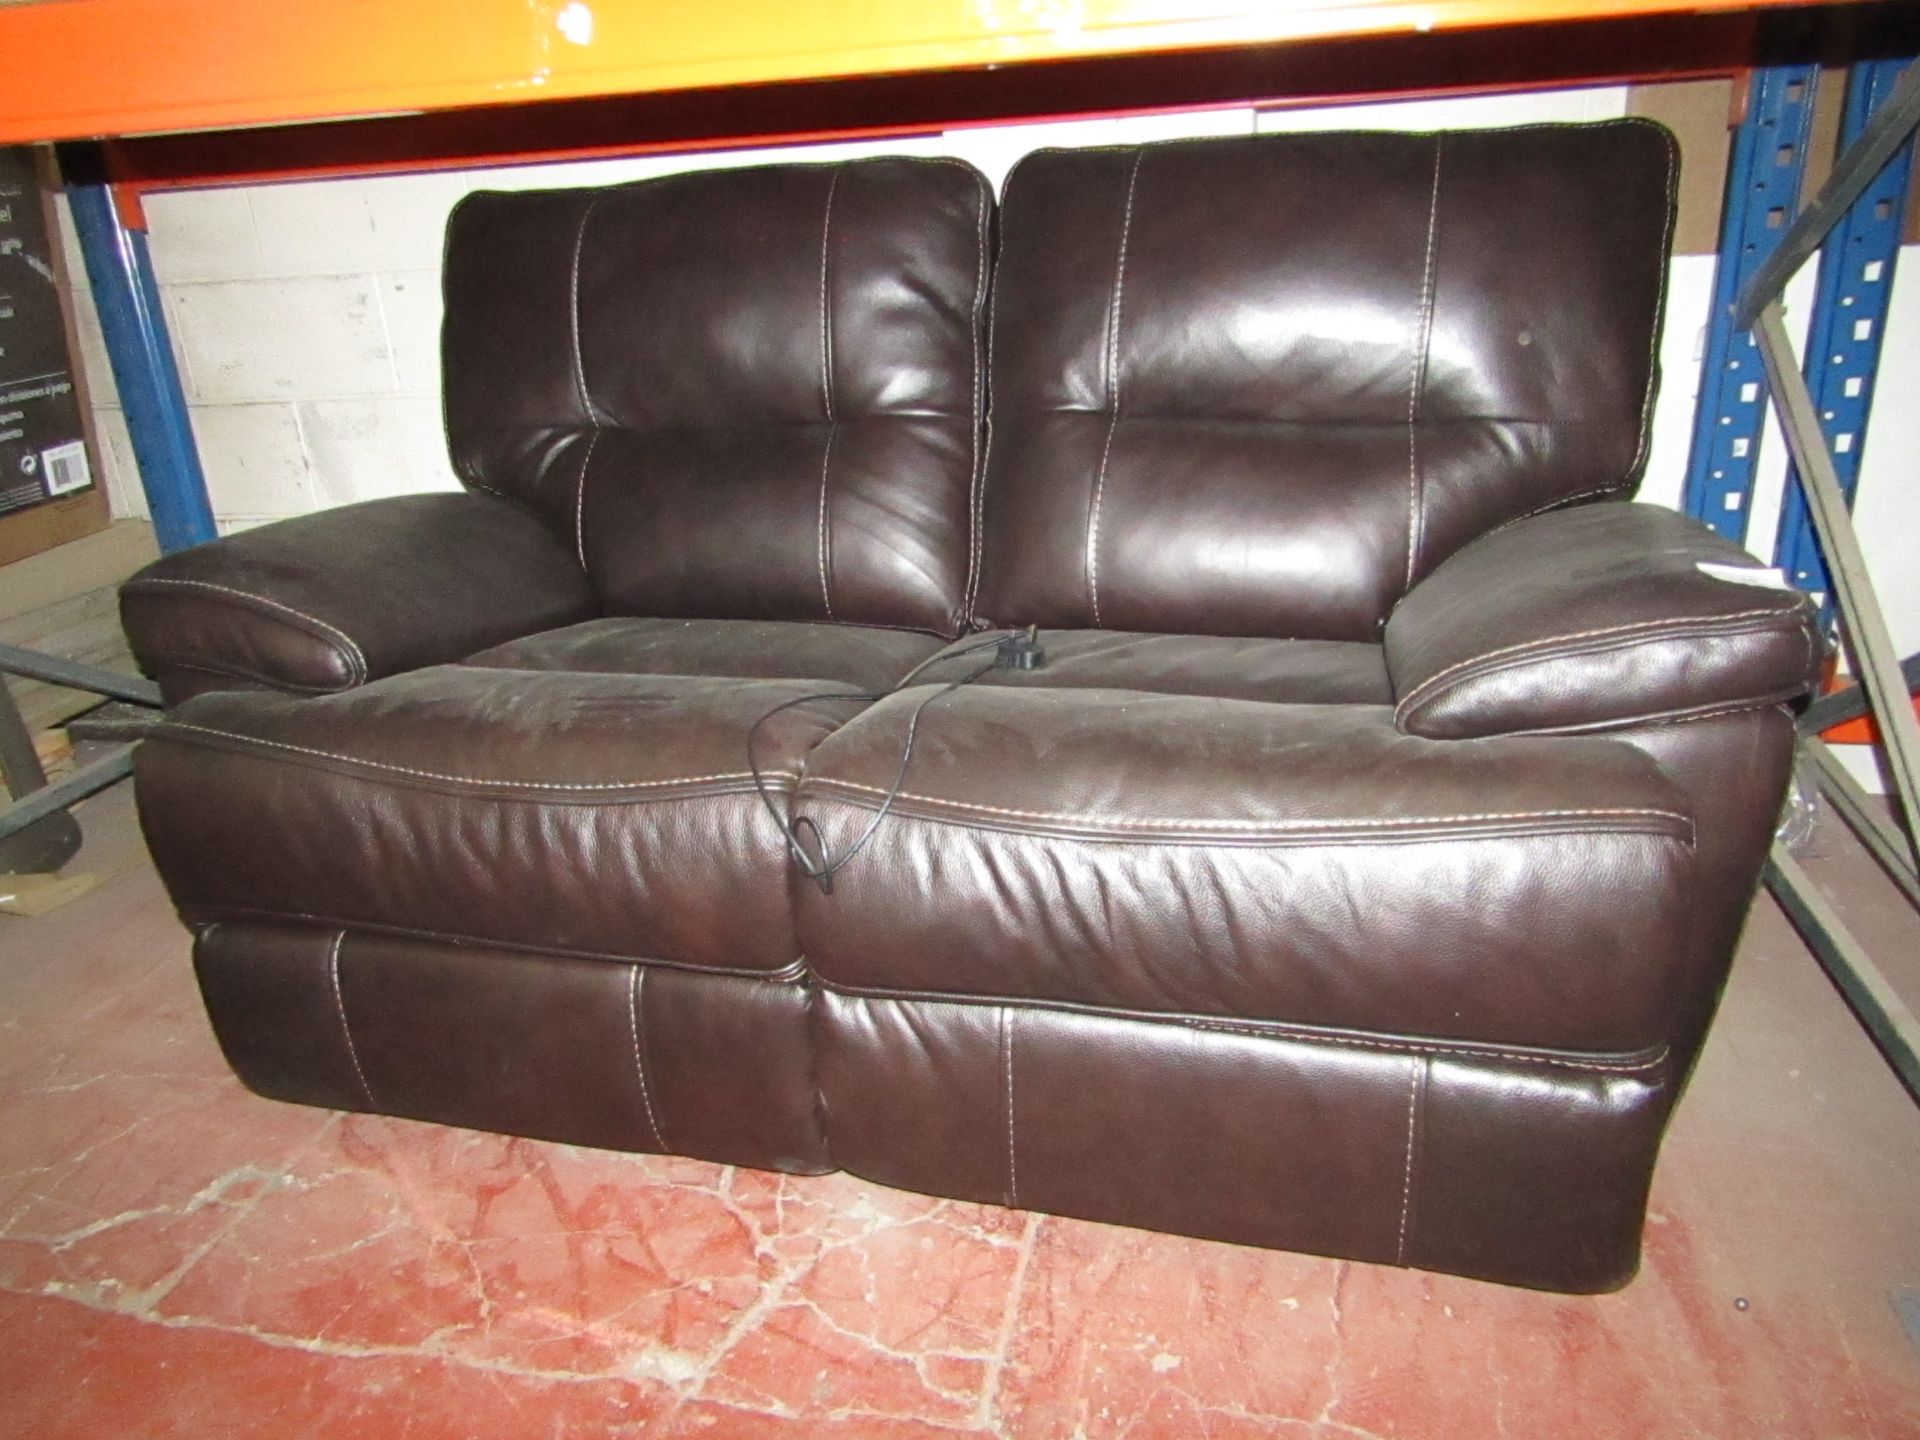 Brown leather electric 2 seater reclinig sofa with USB port, tested working, a few scuffs but